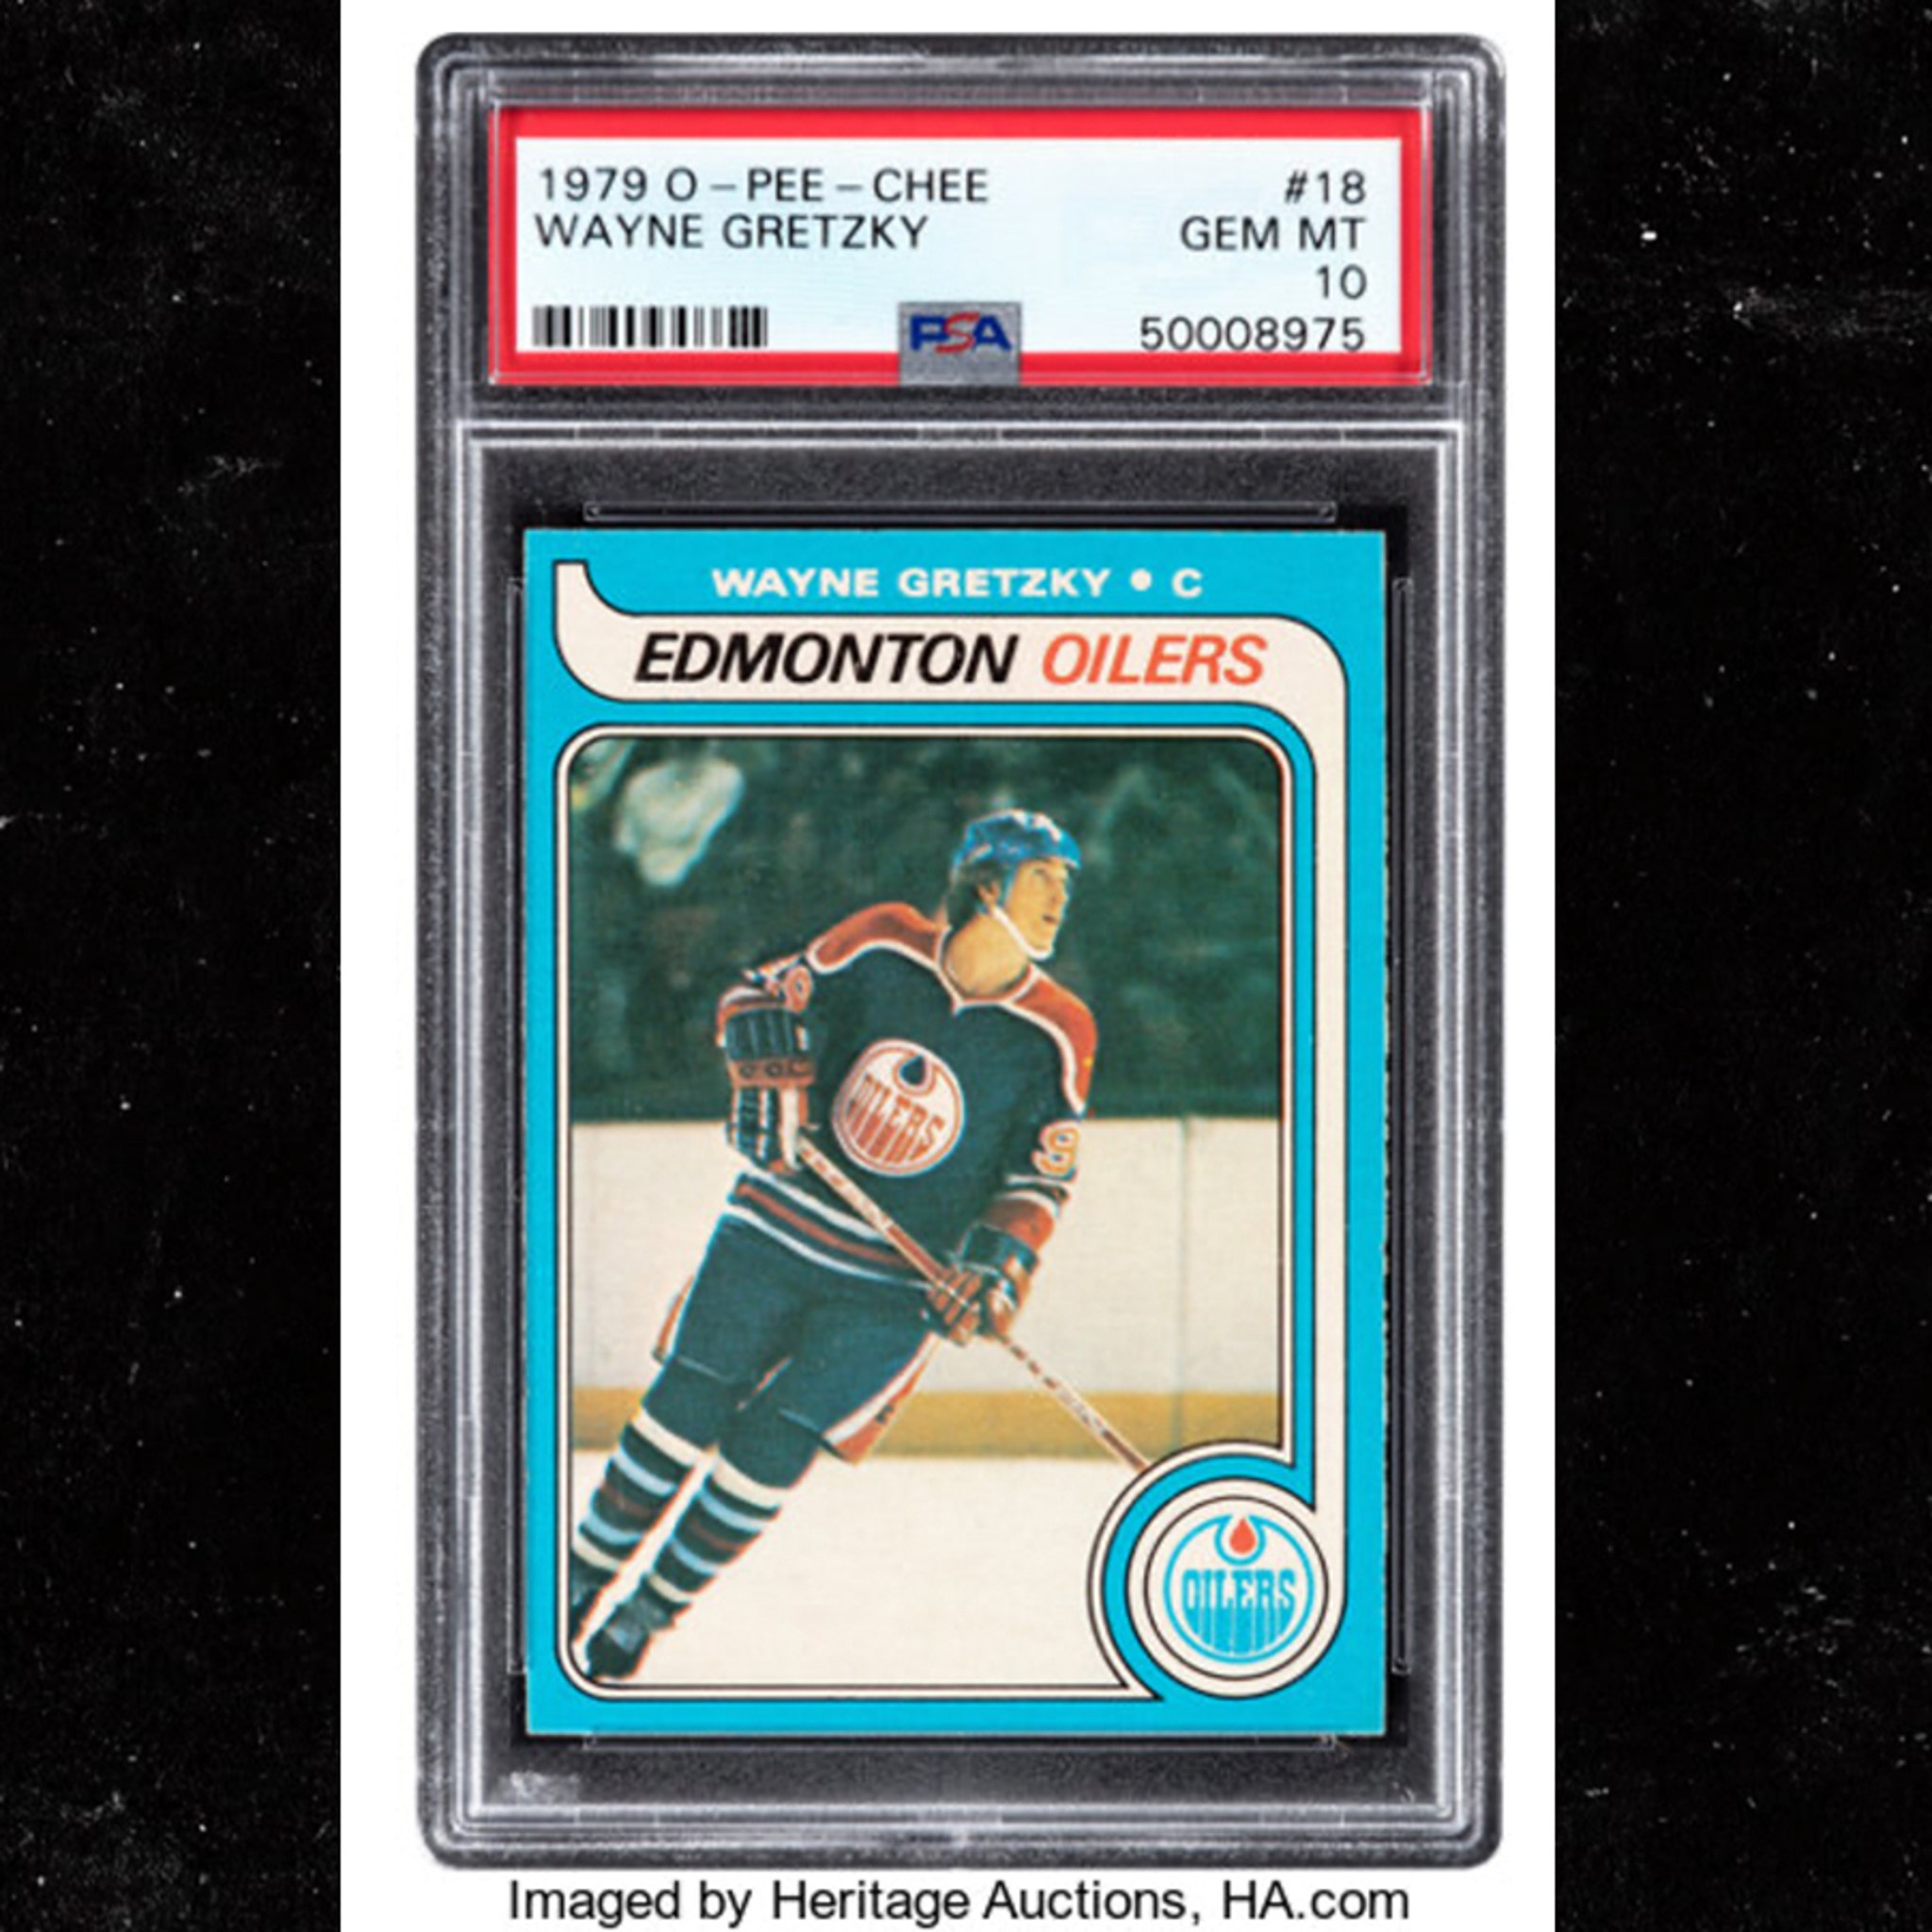 Wayne Gretzky Rookie Cards for Sale: Buyer's Guide